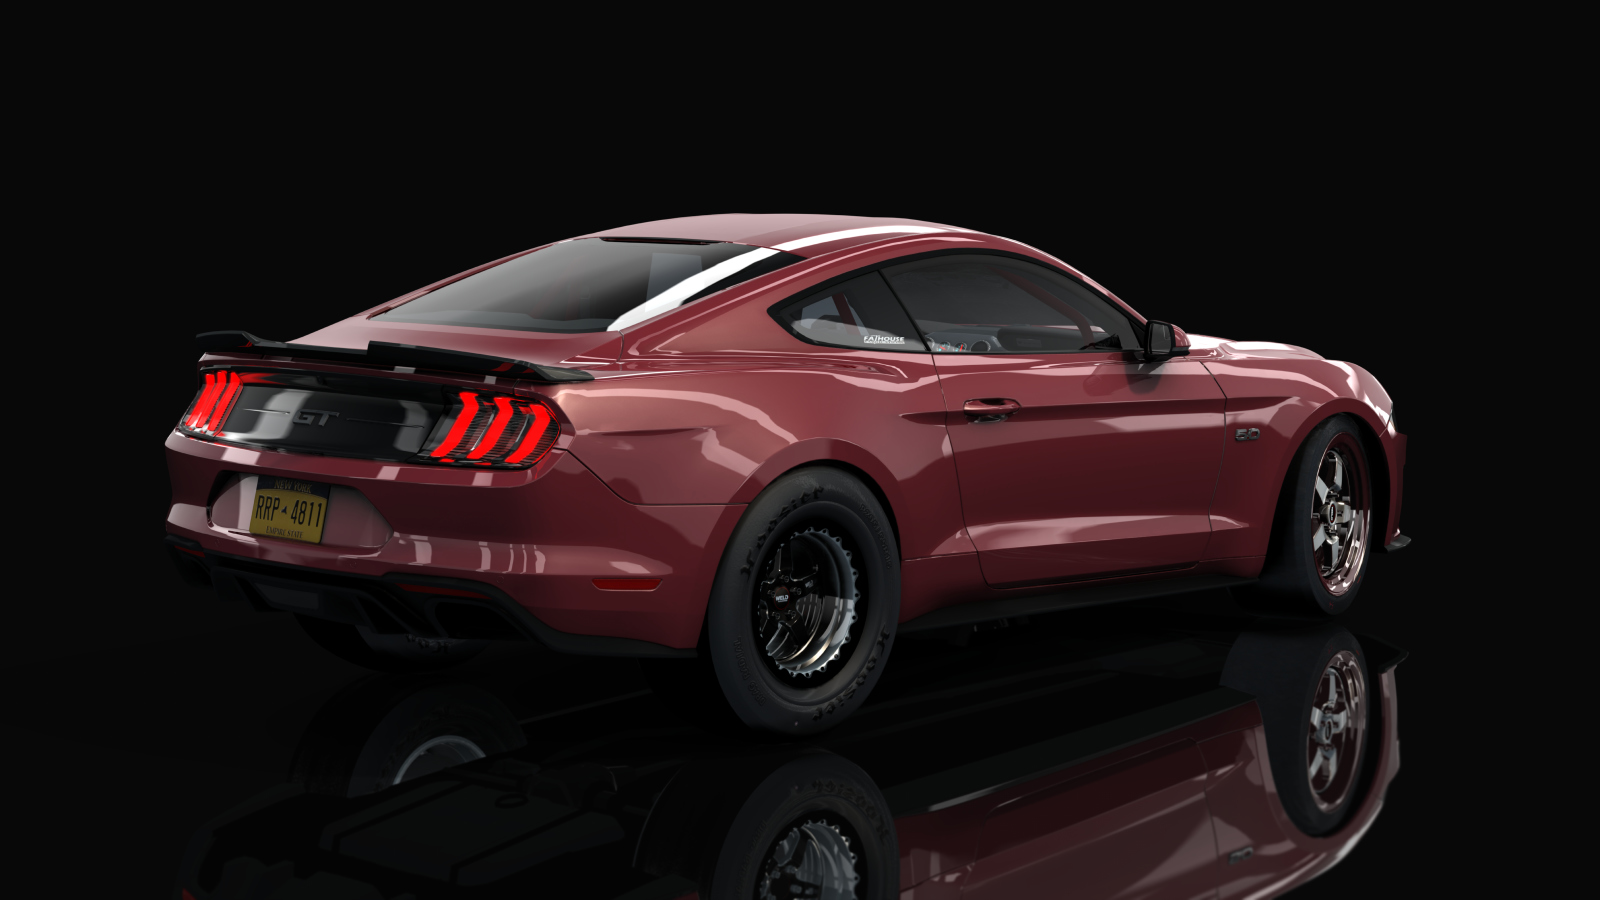 Ford Mustang GT 2018 1500Rx, skin Lucid_Red